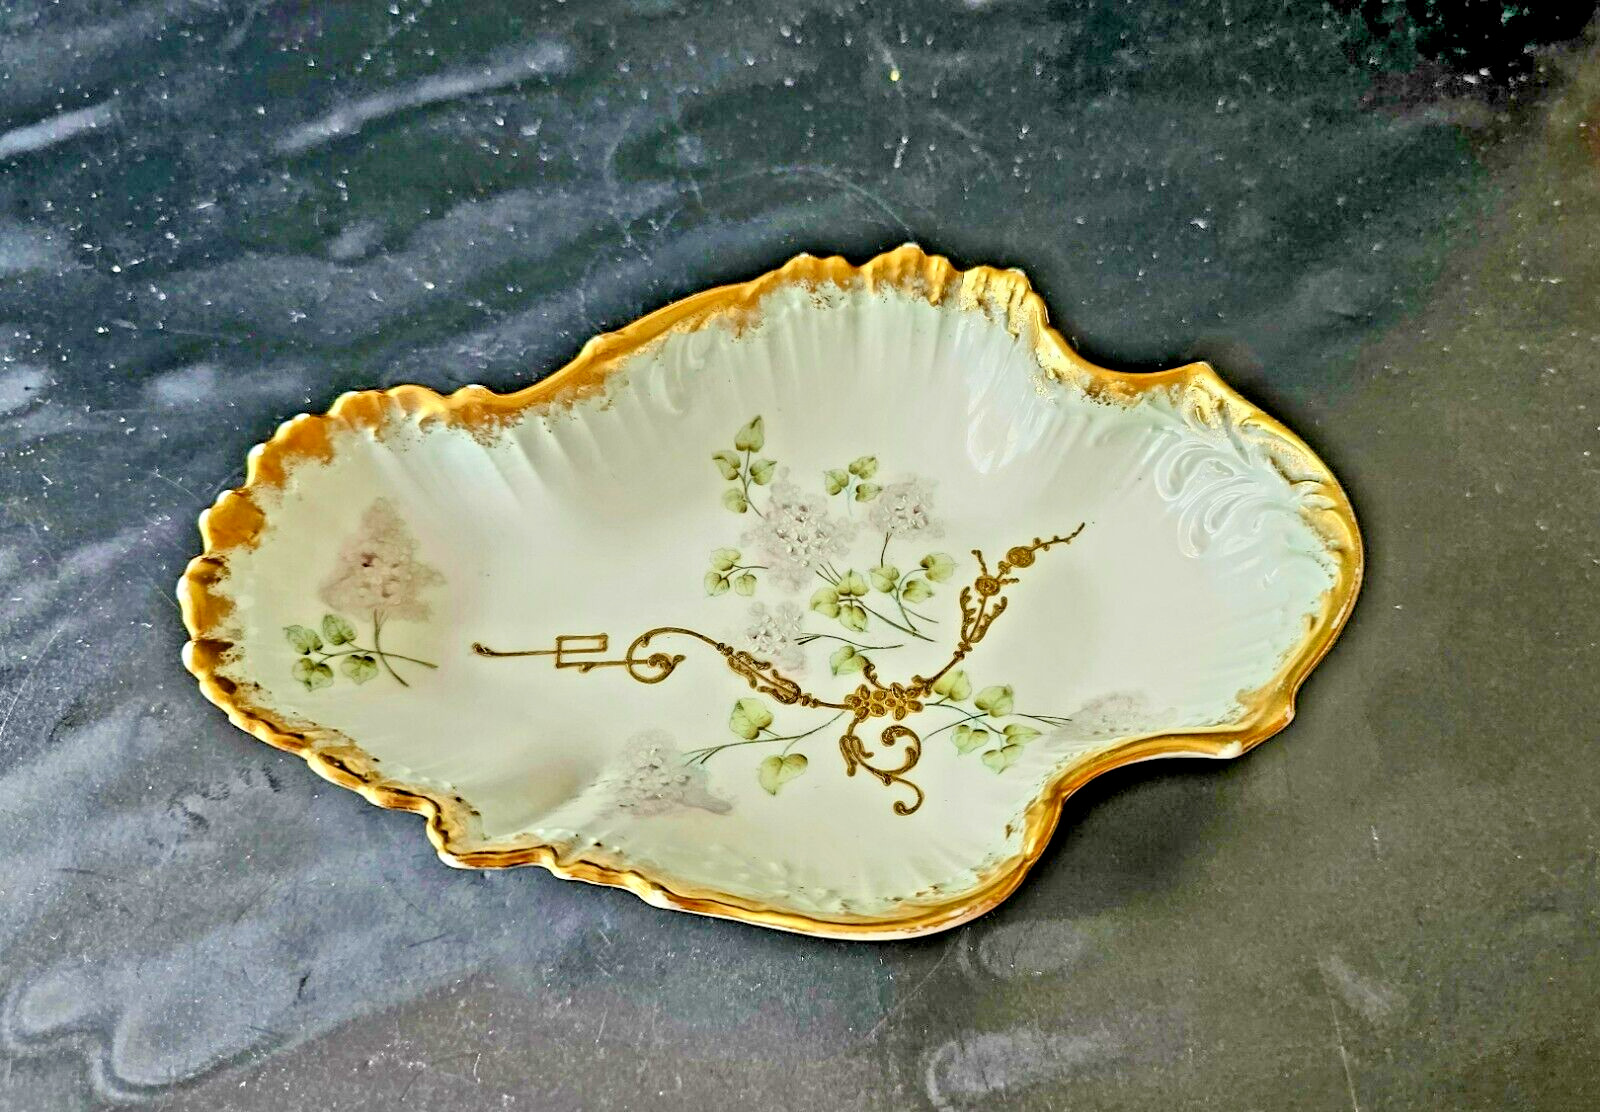 Antique - Elite Limoges - Porcelain - Candy Dish with Wisteria and Gold Trim